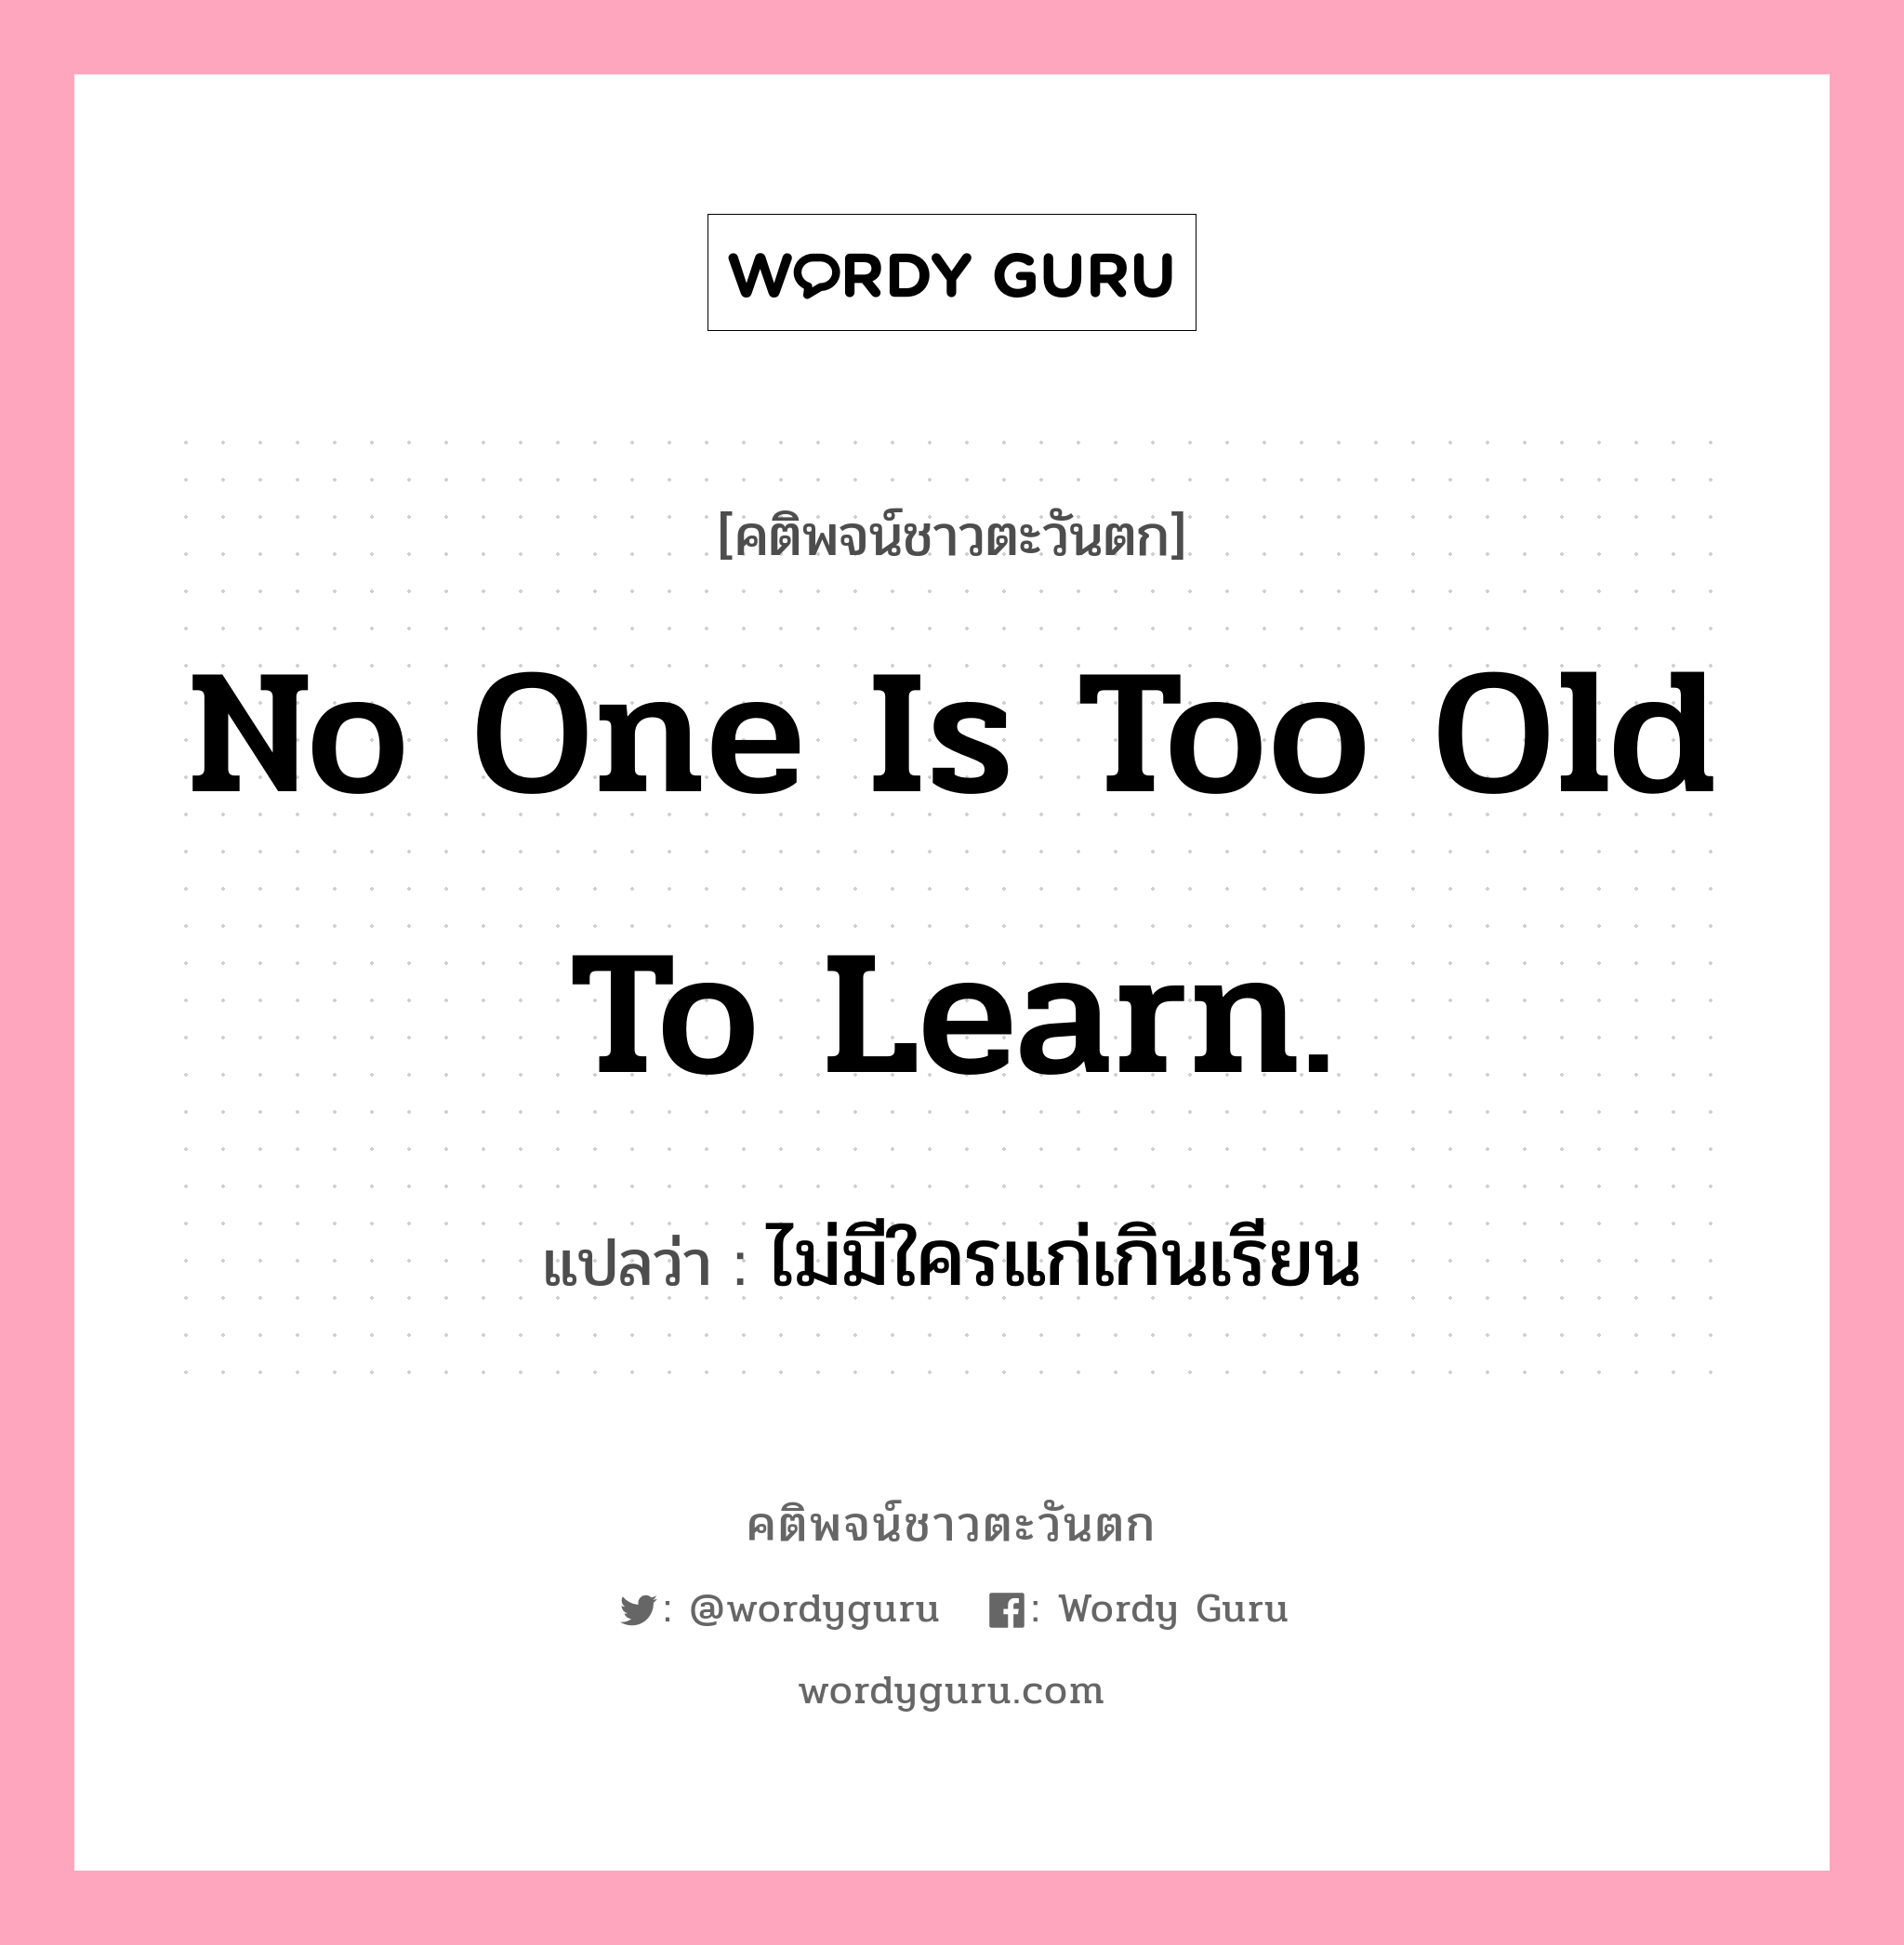 No one is too old to learn., คติพจน์ชาวตะวันตก No one is too old to learn. แปลว่า ไม่มีใครแก่เกินเรียน